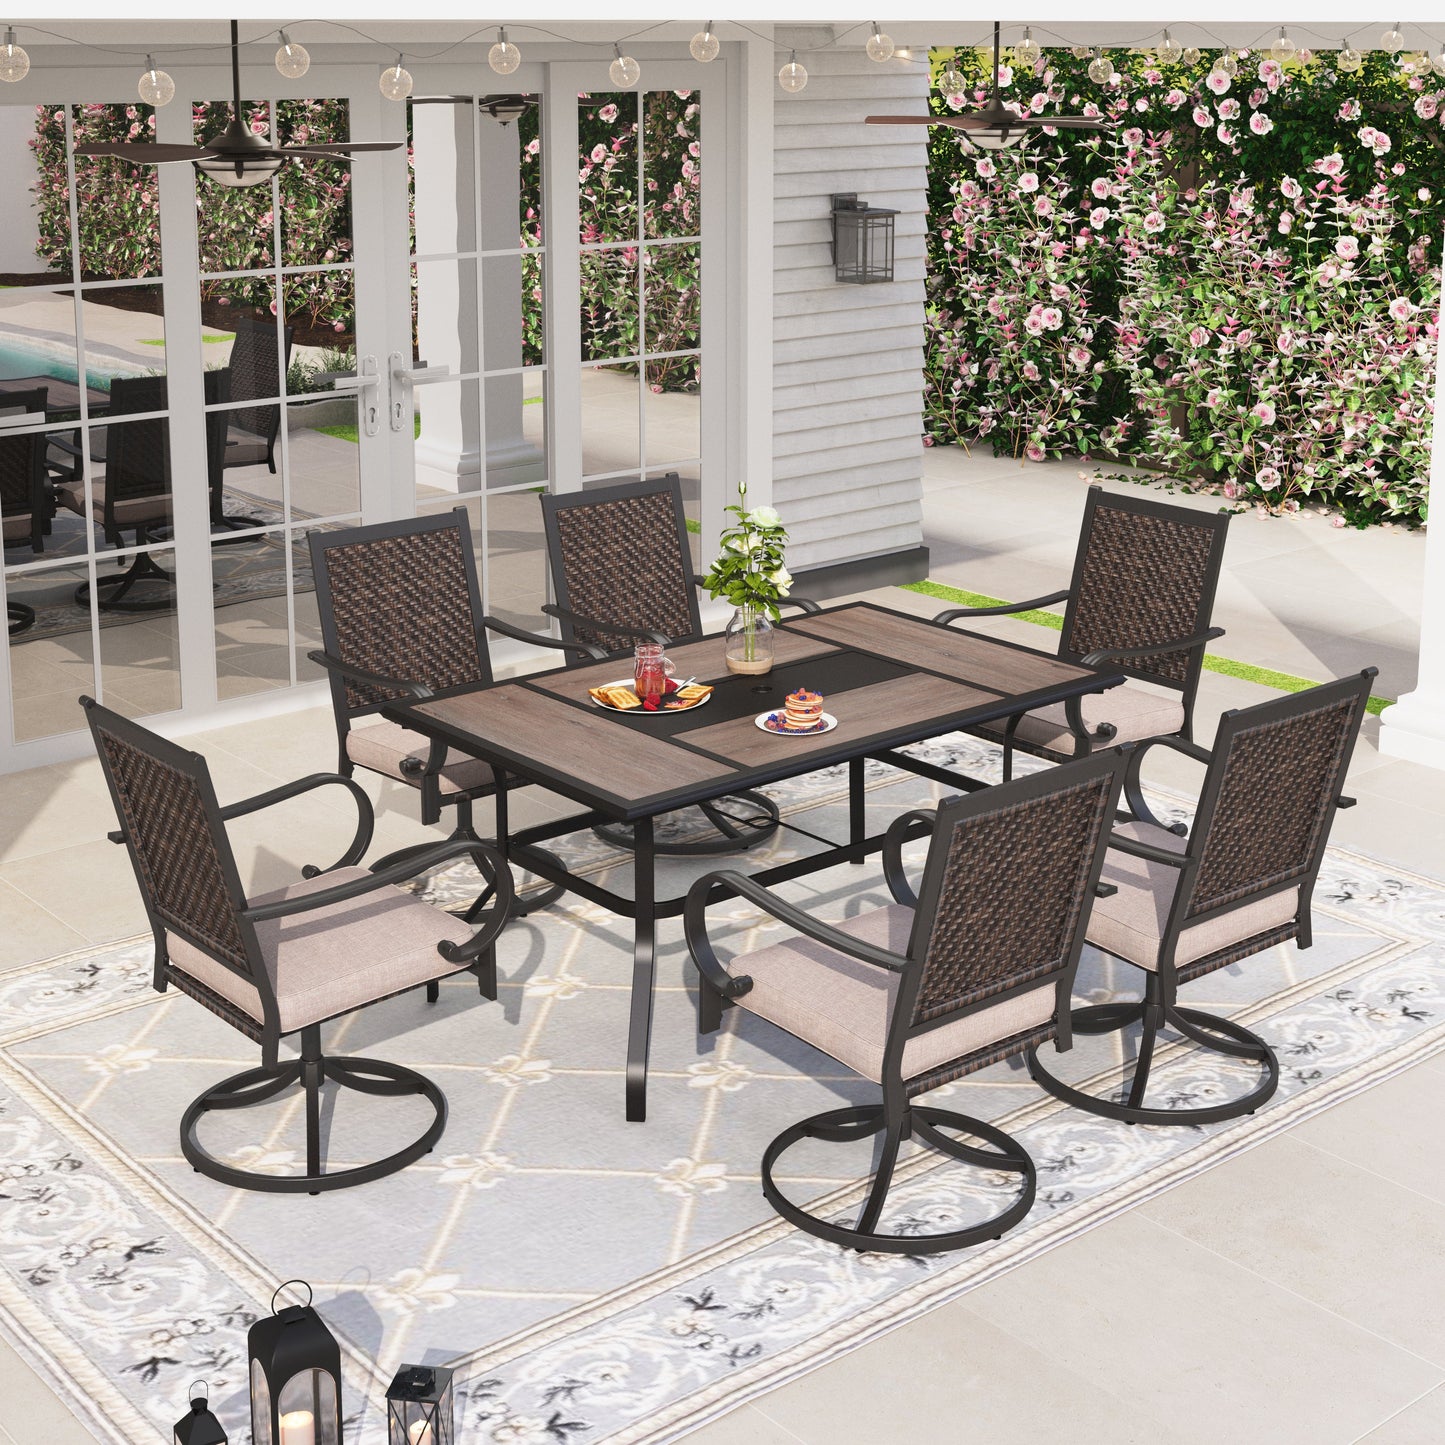 Sophia & William 7 Pieces Outdoor Patio Dining Set Wicker Swivel Chairs and Steel Table